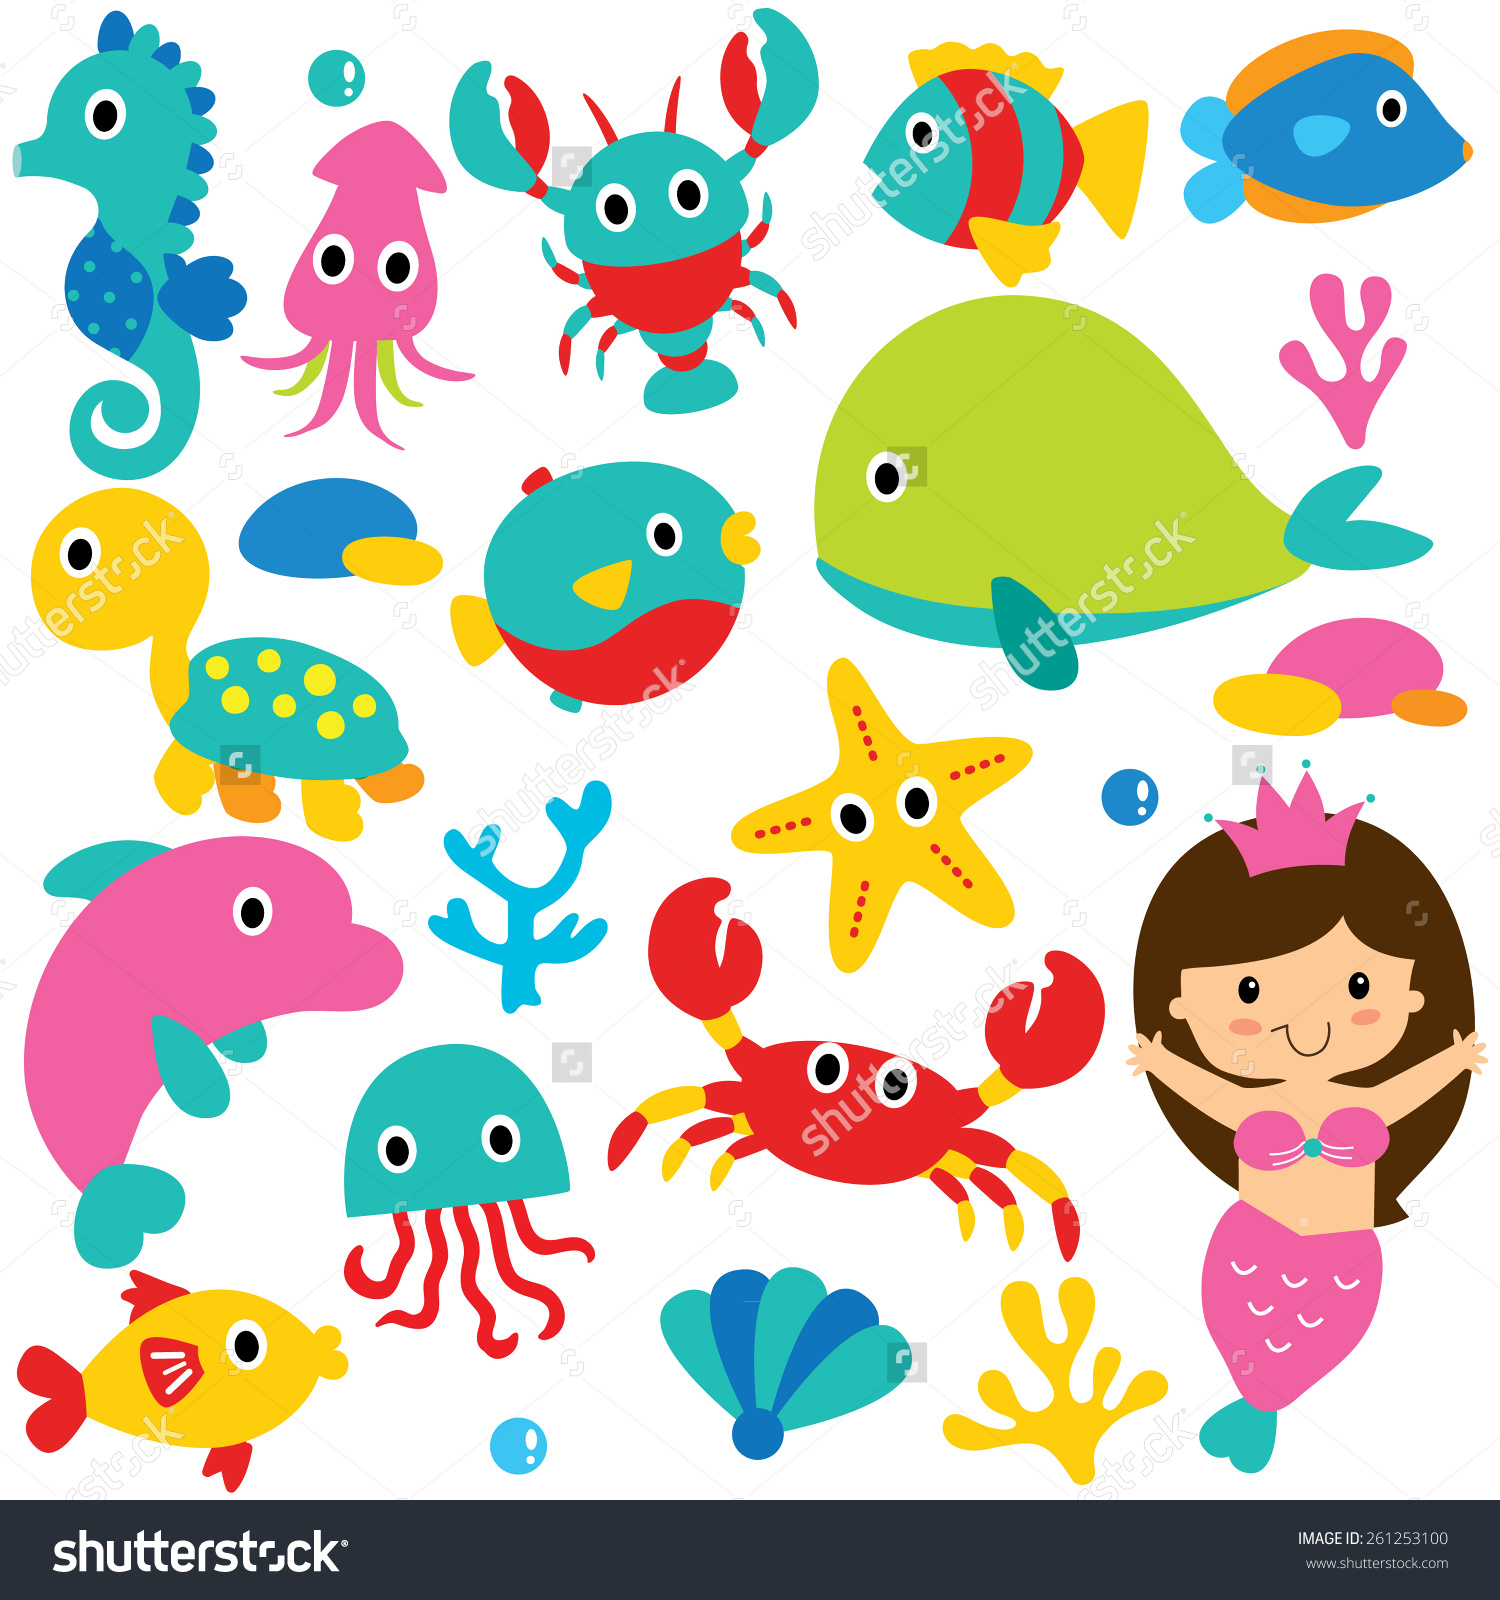 Clipart Sea Animals. Save to a lightbox